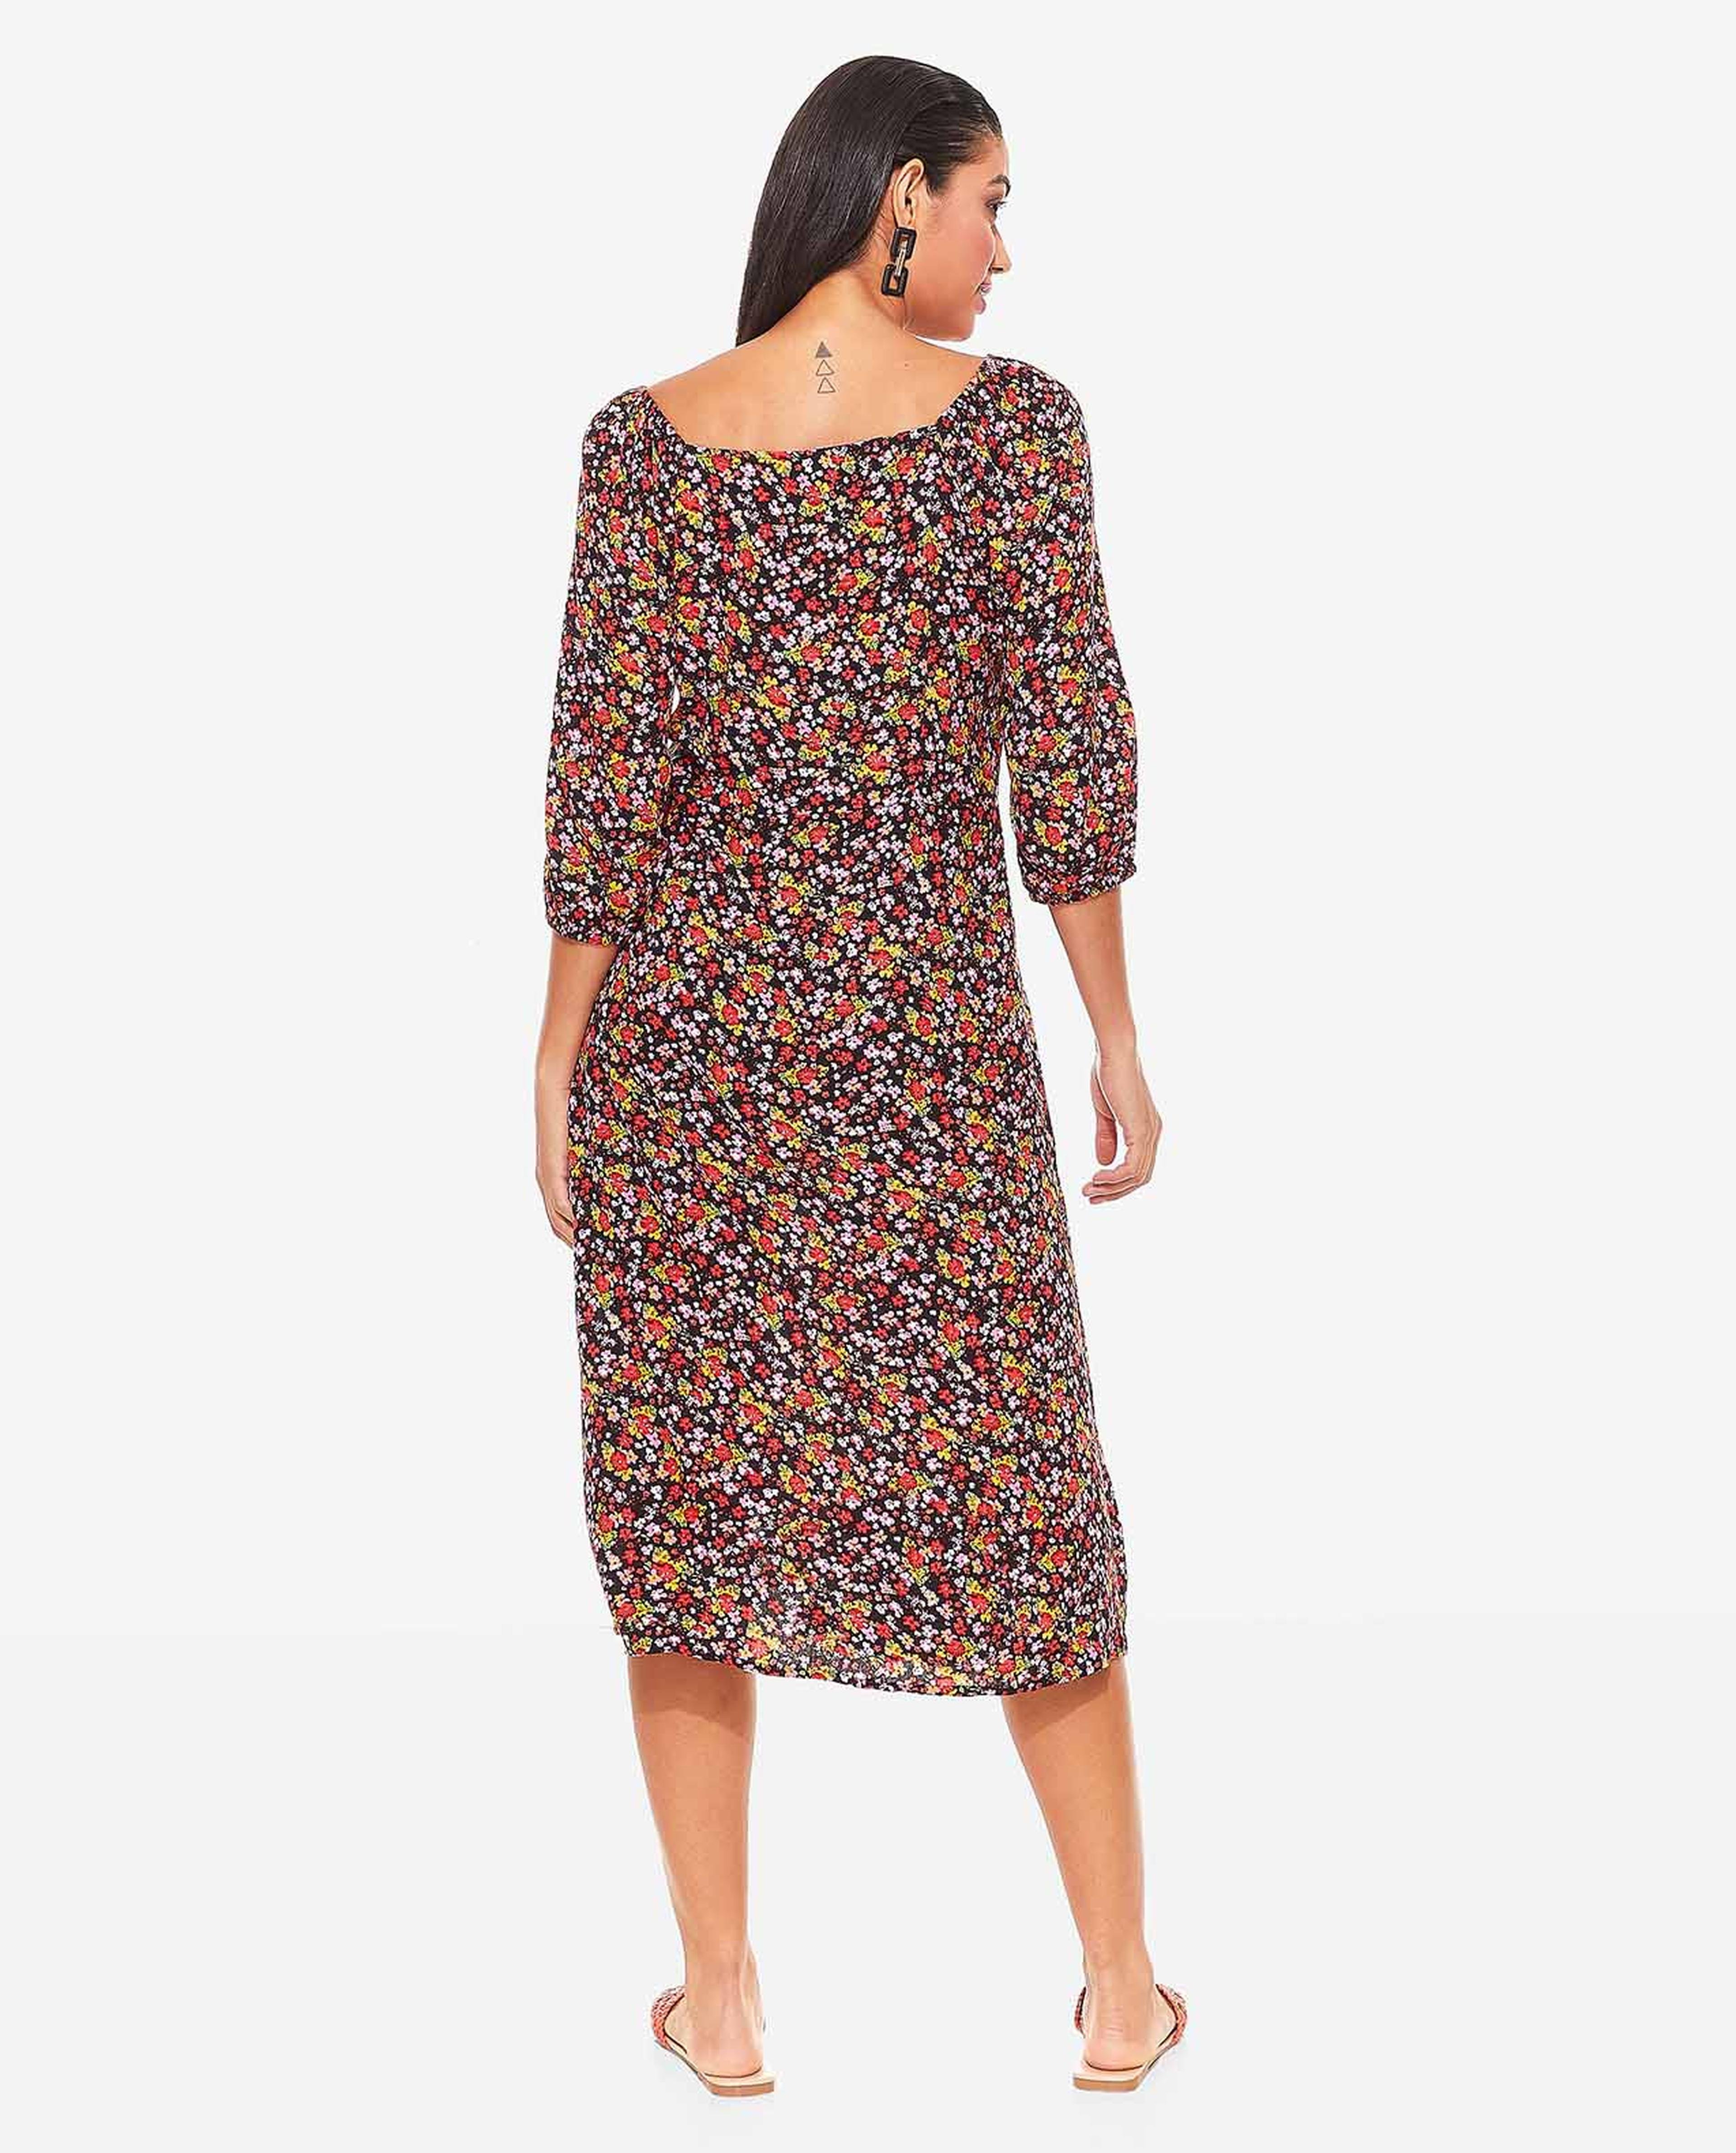 Floral Printed Midi Dress with Square Neck and 3/4th Sleeves